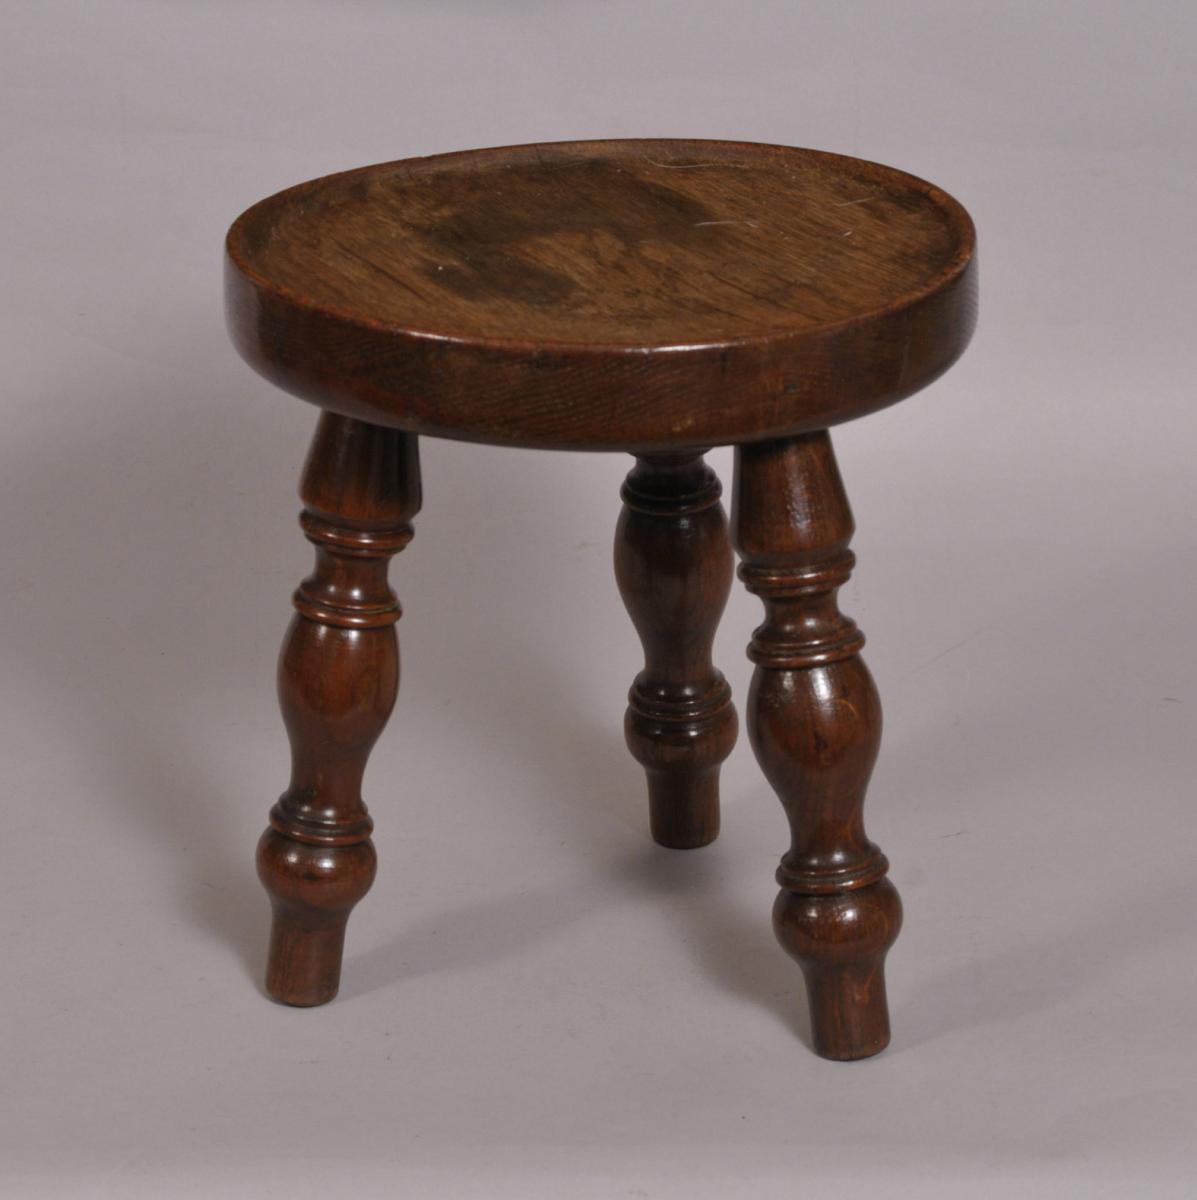 S/3757 Antique 19th Century Oak Dished Top Stool